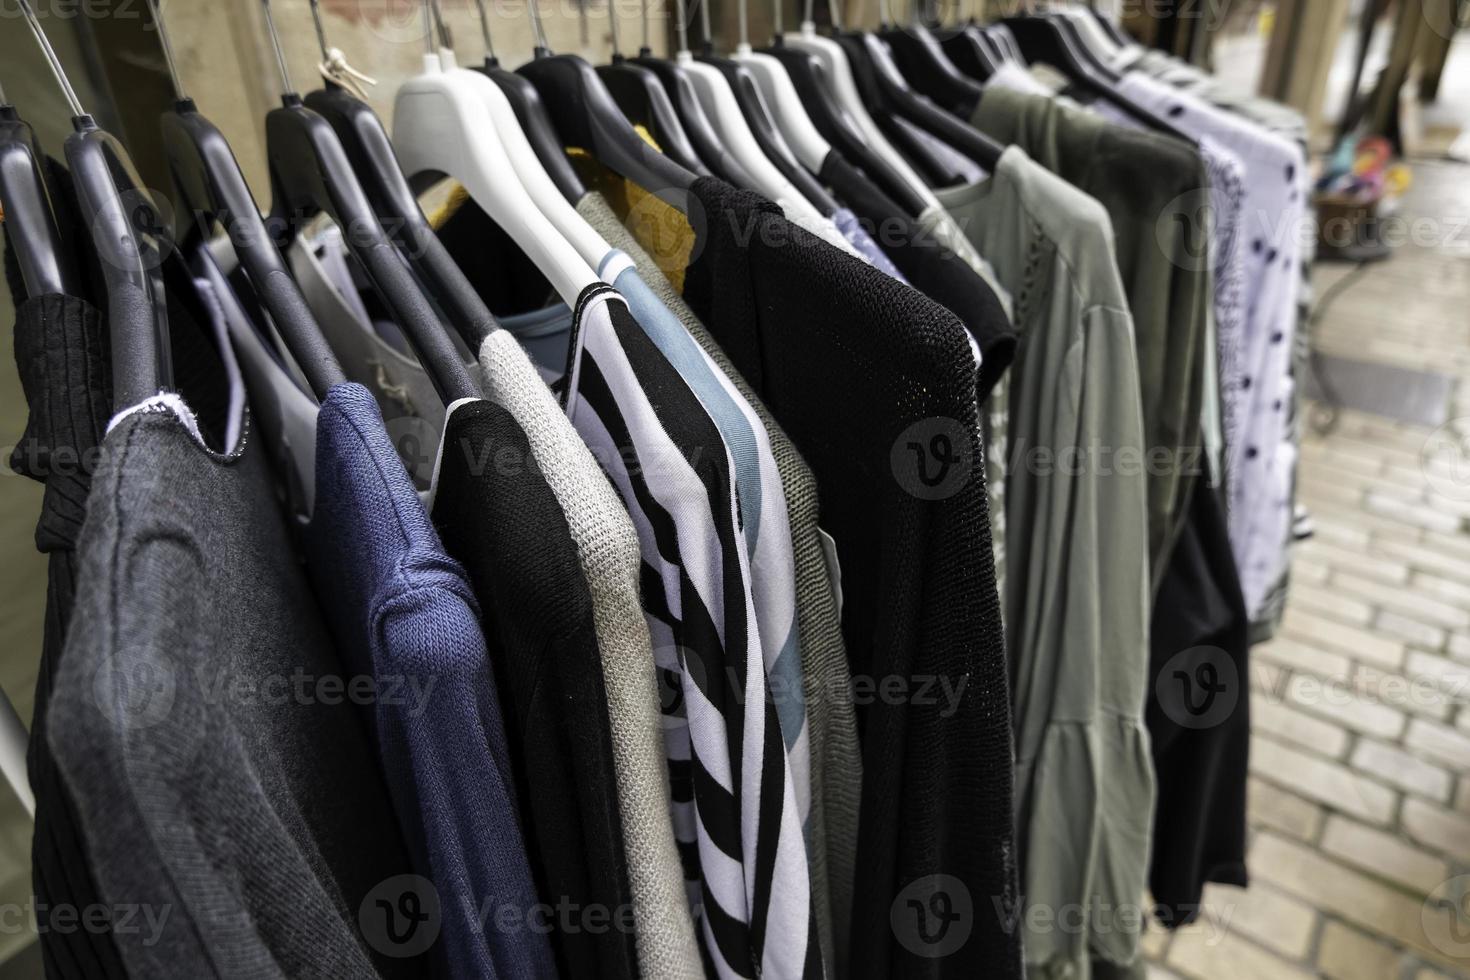 Clothes hanging on hangers photo